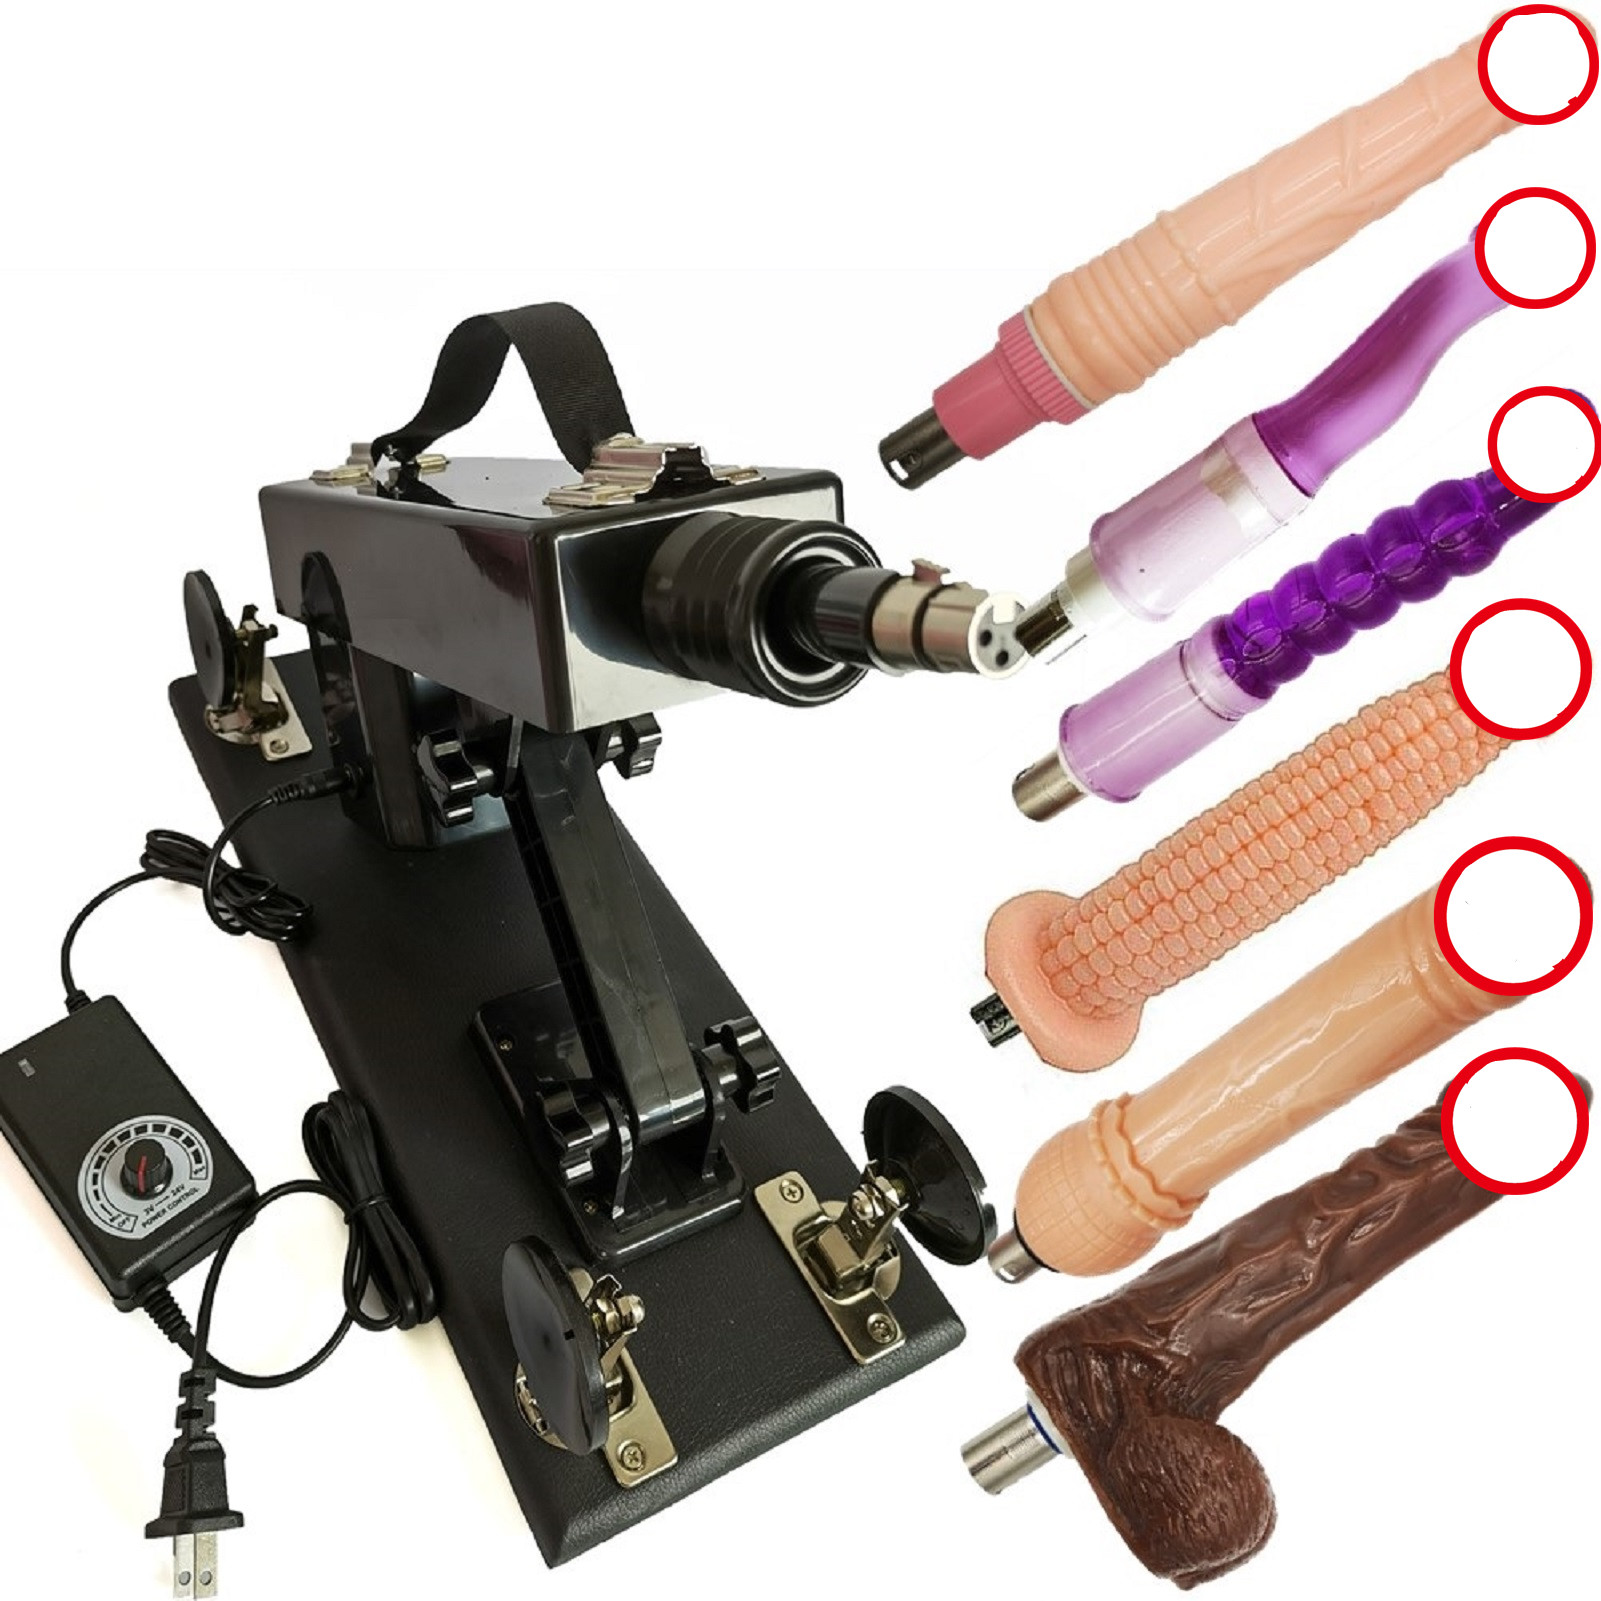 

AKKAJJ Automatic Thrusting Sex Machine for Private Masturbation with 3XLR Connector Attachments A6 Black Speed and Anlgle Adjustable